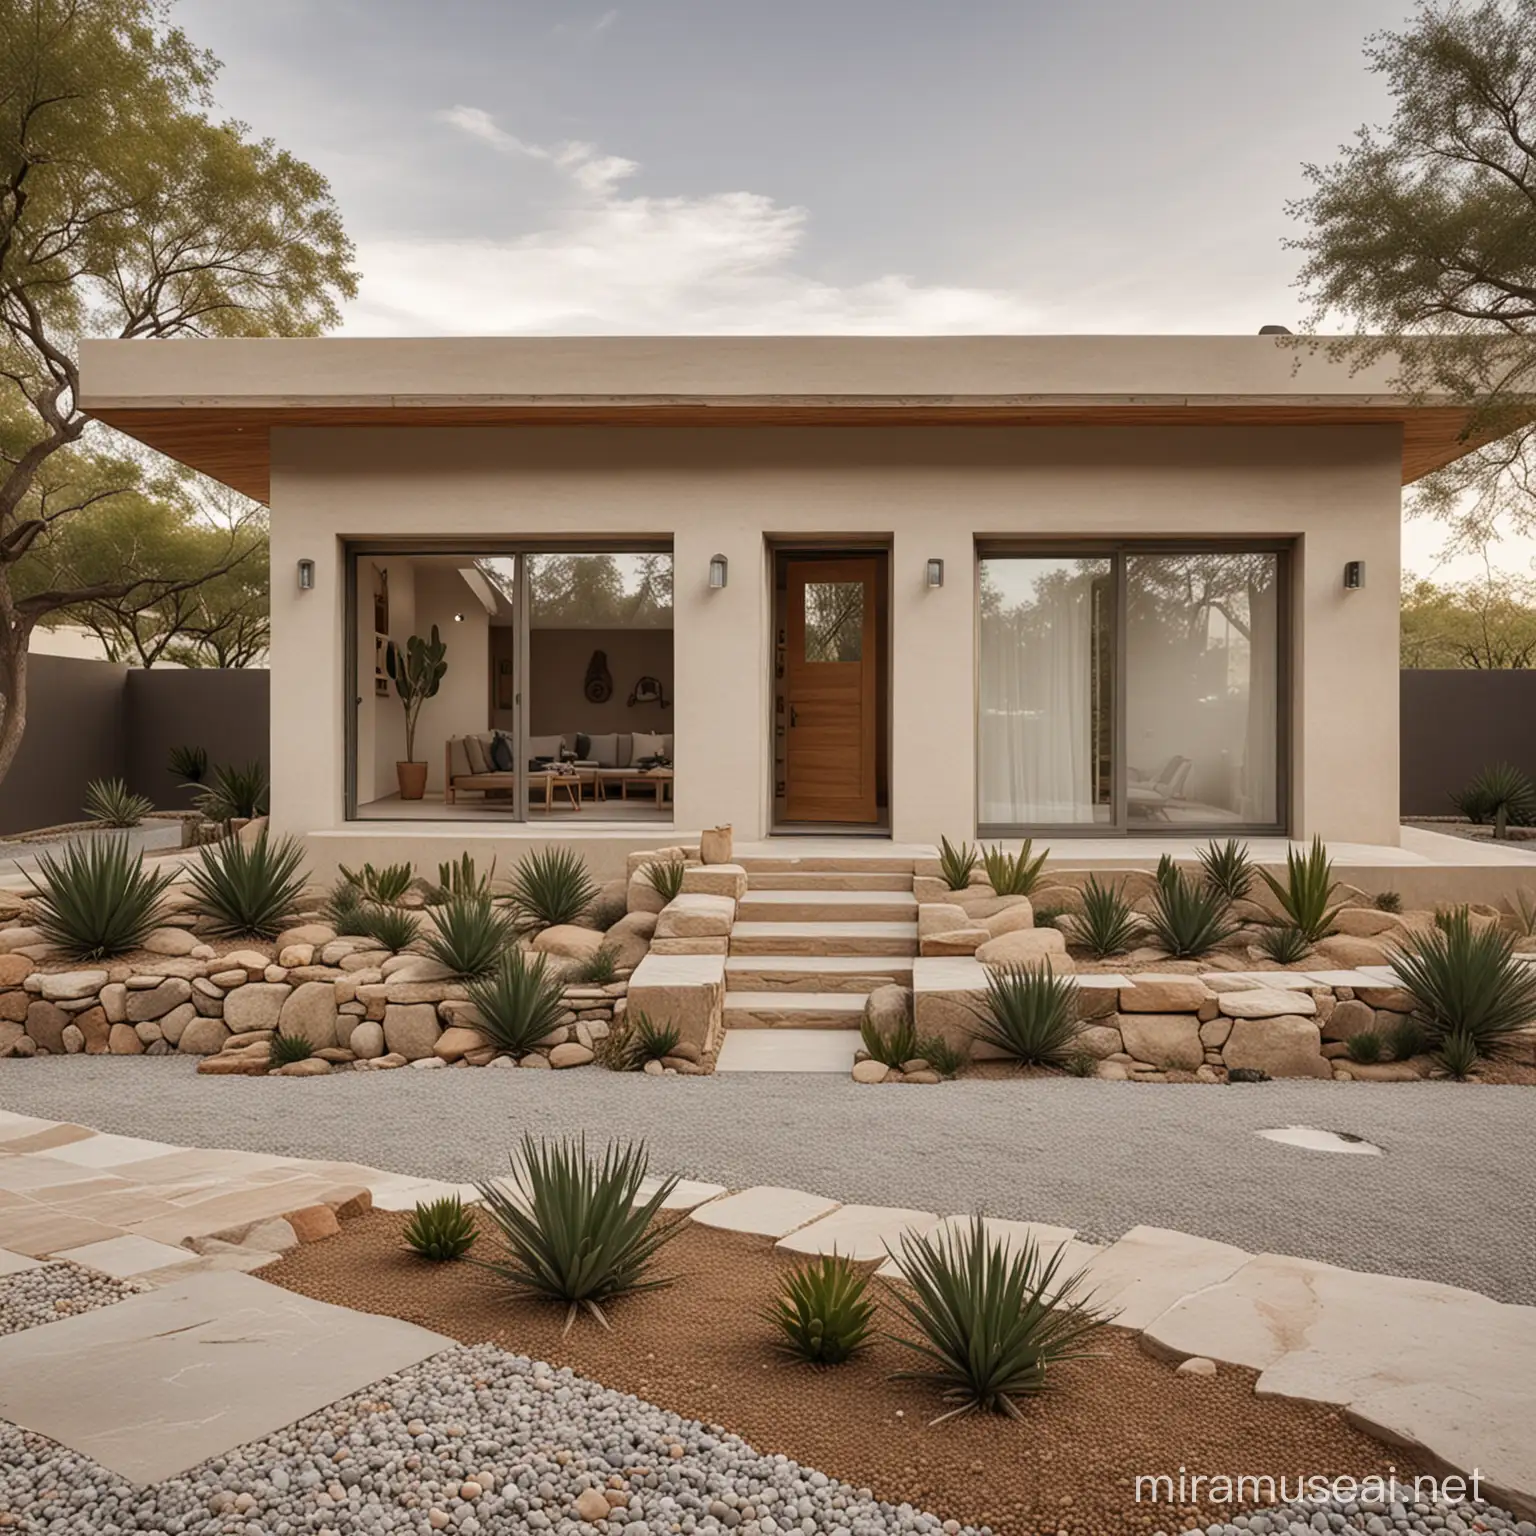 Illustrate a modern Mexican casita with clean lines, large windows, and a flat roof. Incorporate indigenous materials like stone and wood, with subtle hues of beige and gray, to create a minimalist yet inviting aesthetic